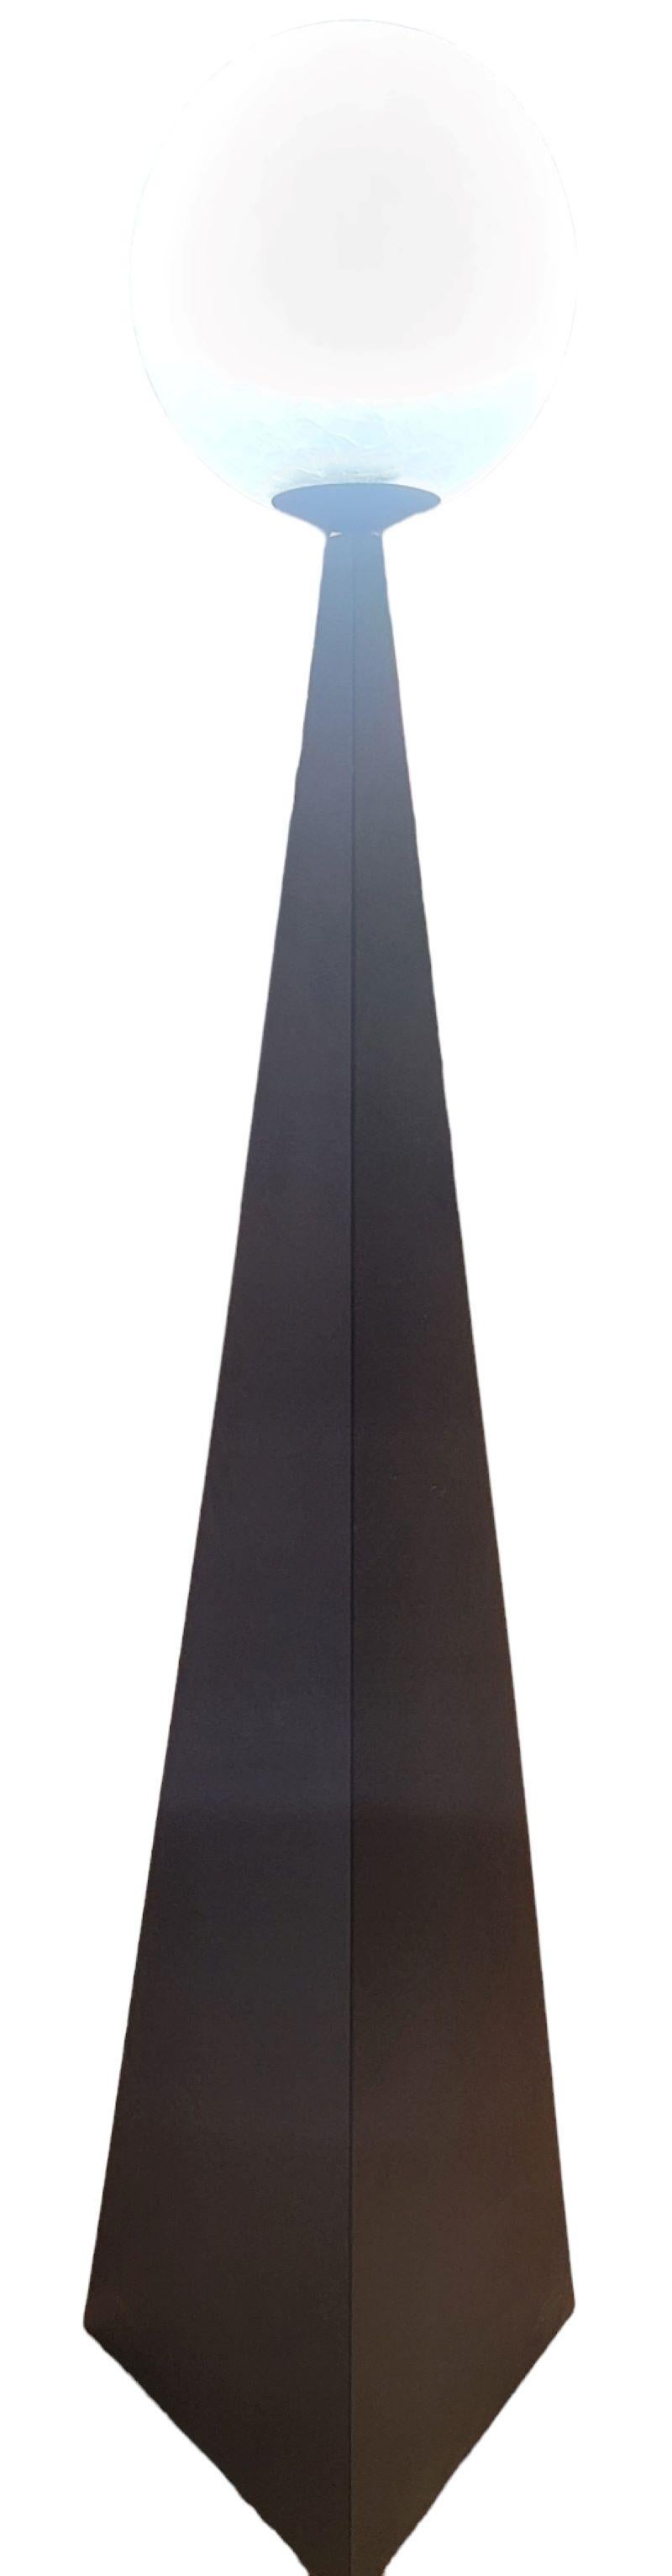 Bonhomme Floor Lamp By Artlier Areti. Wonderful Black Body with a triangular base that widens as it goes down for a more stable base. The Bulbe is a textured glass. With many intersecting waves. Wonderful look and modern setting. Measures approx -